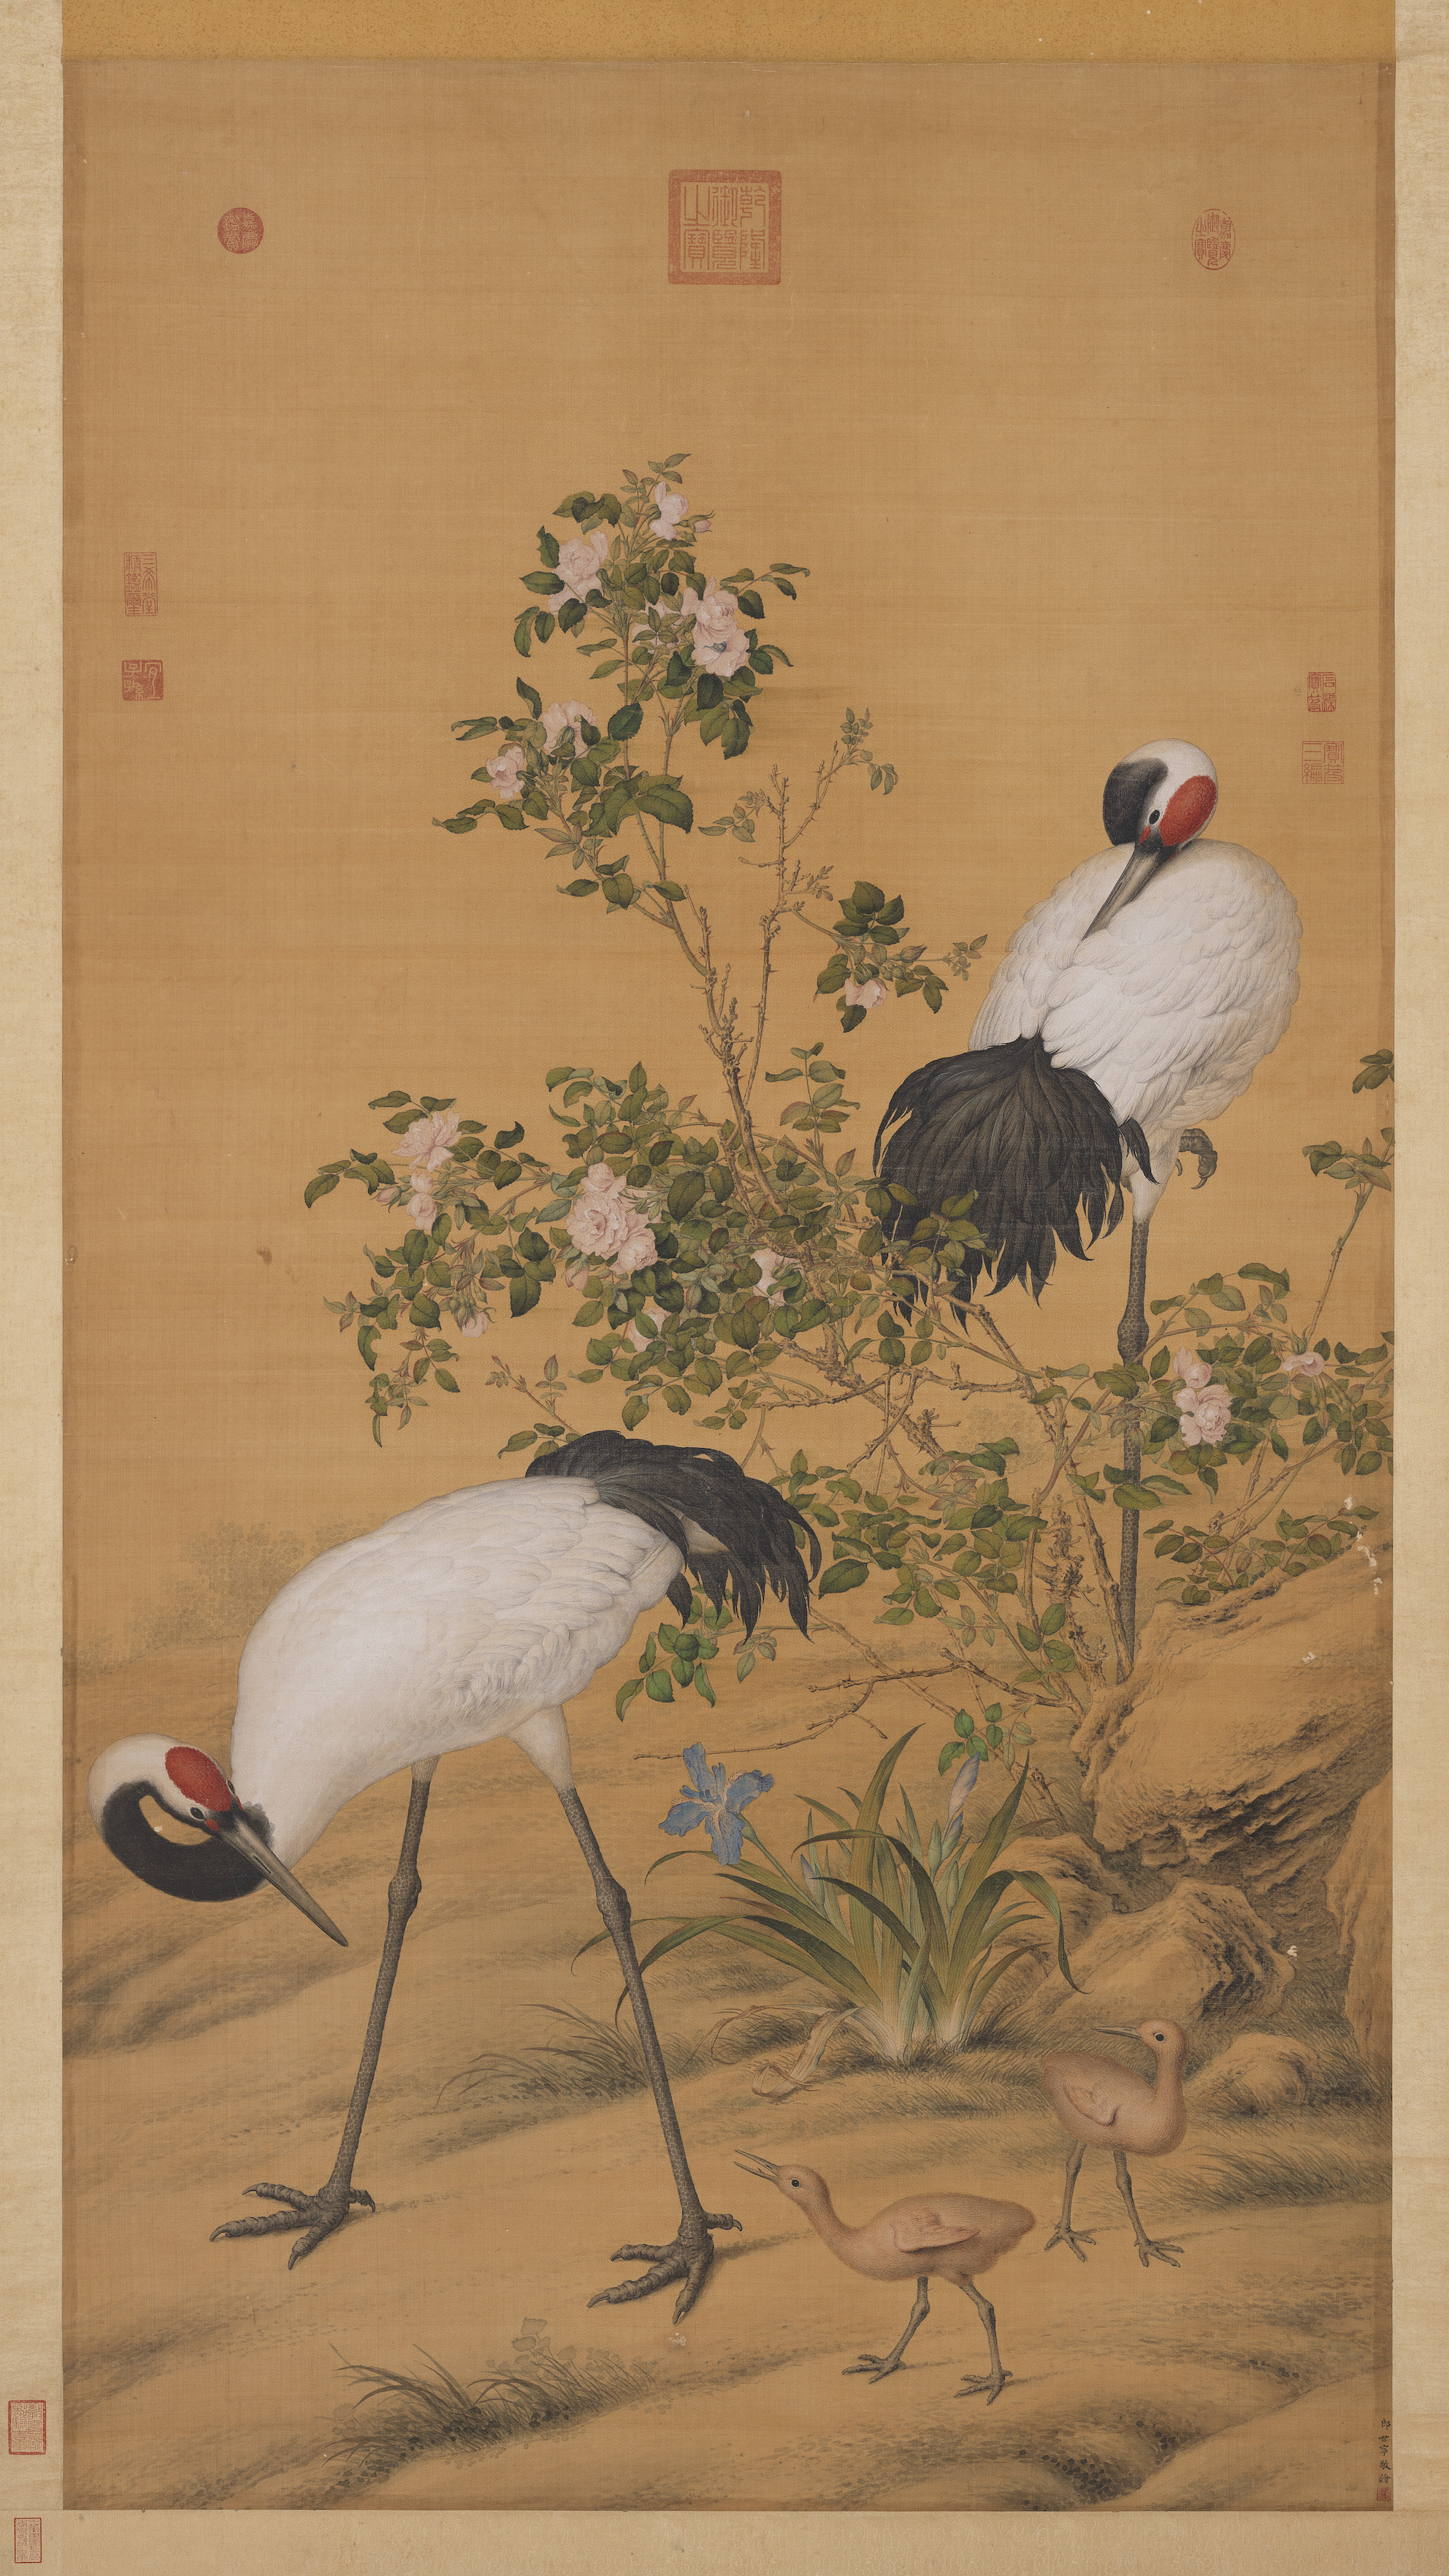 Pair of Cranes in the Shade of Flowers